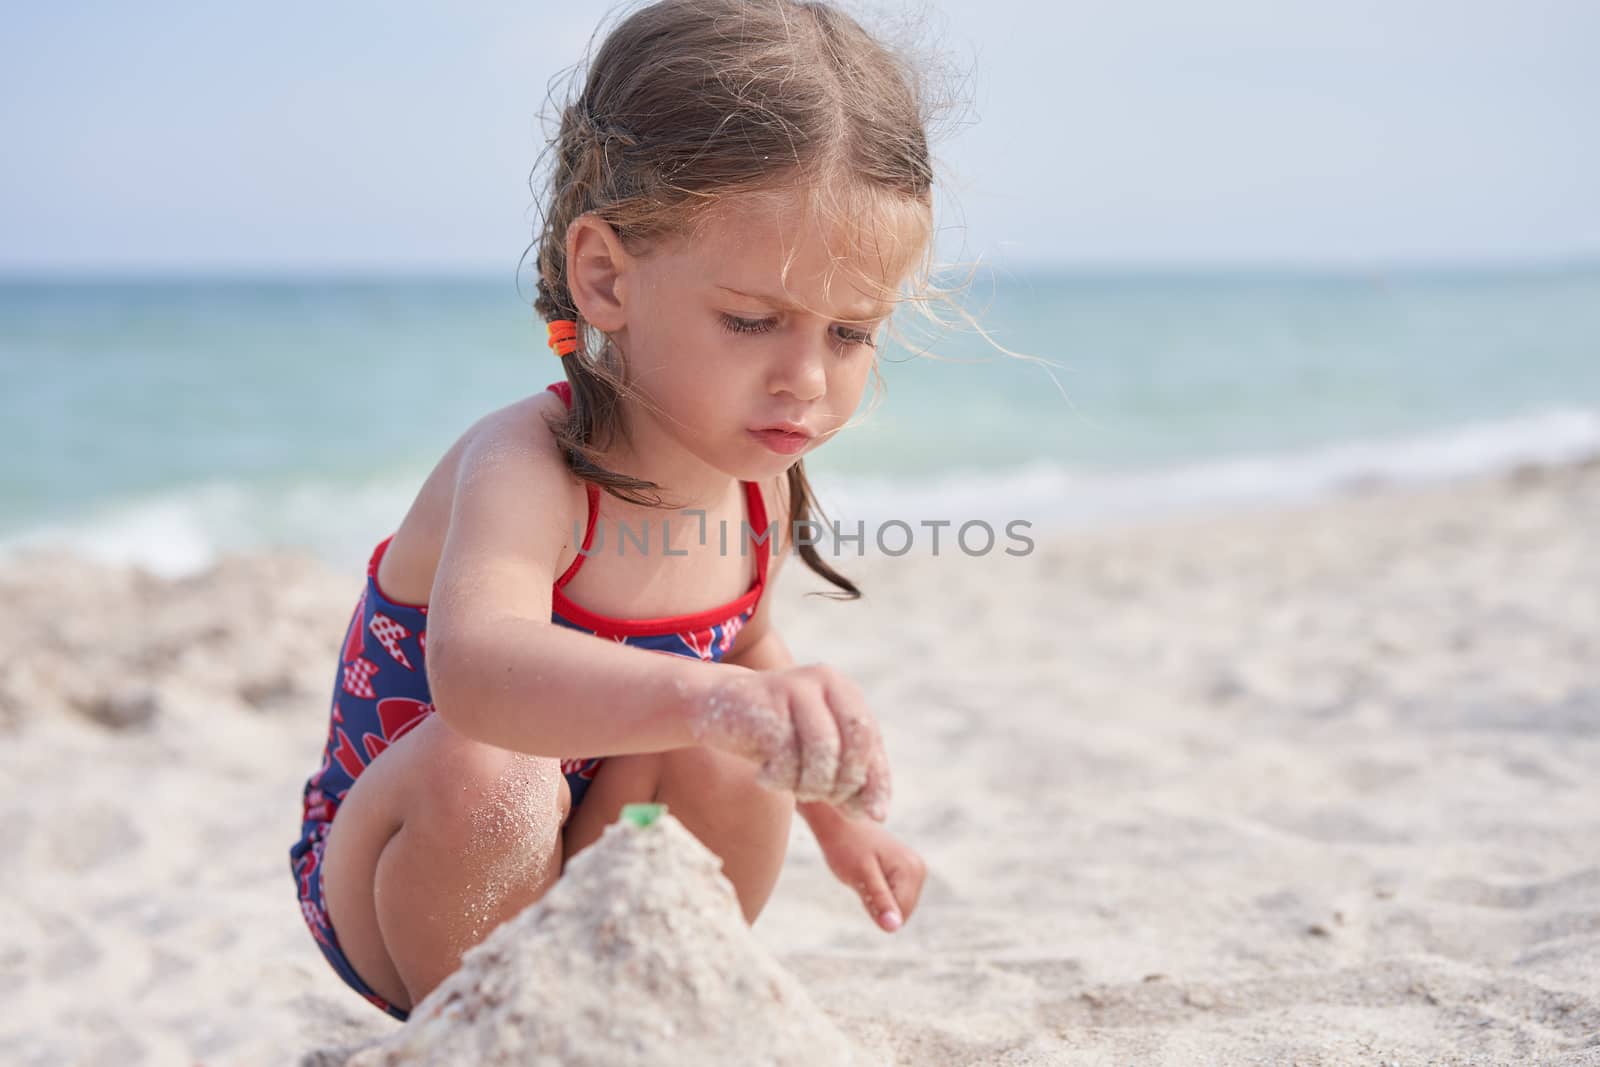 Child playing sand beach Little girl play sad alone summer family vacation Caucasian female 3 years old dressed baby swimwear near sea water